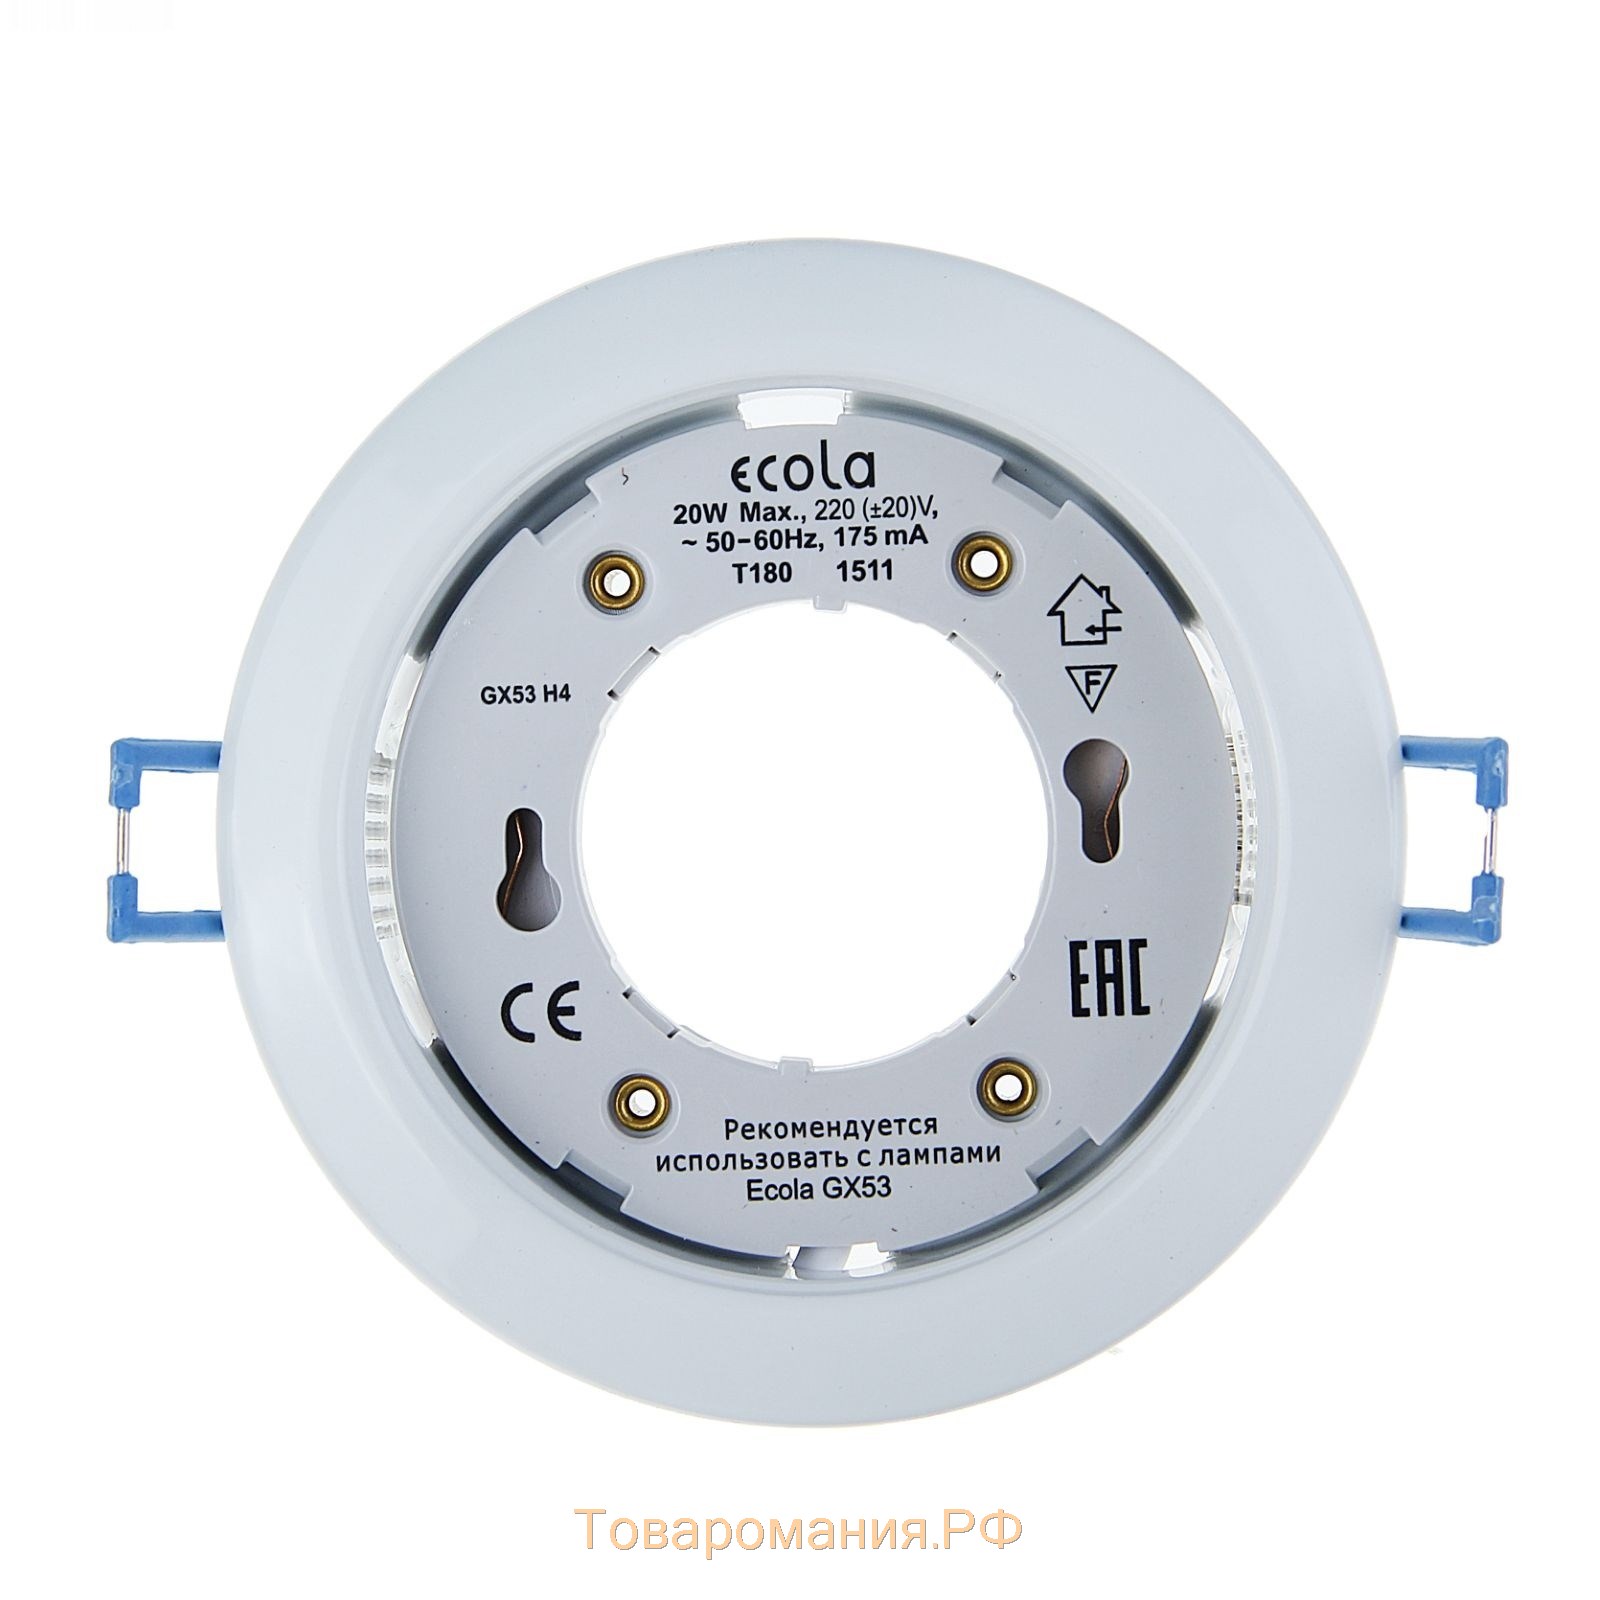 Ecola gx53 h4 Downlight without Reflector_White (светильник) 38x106